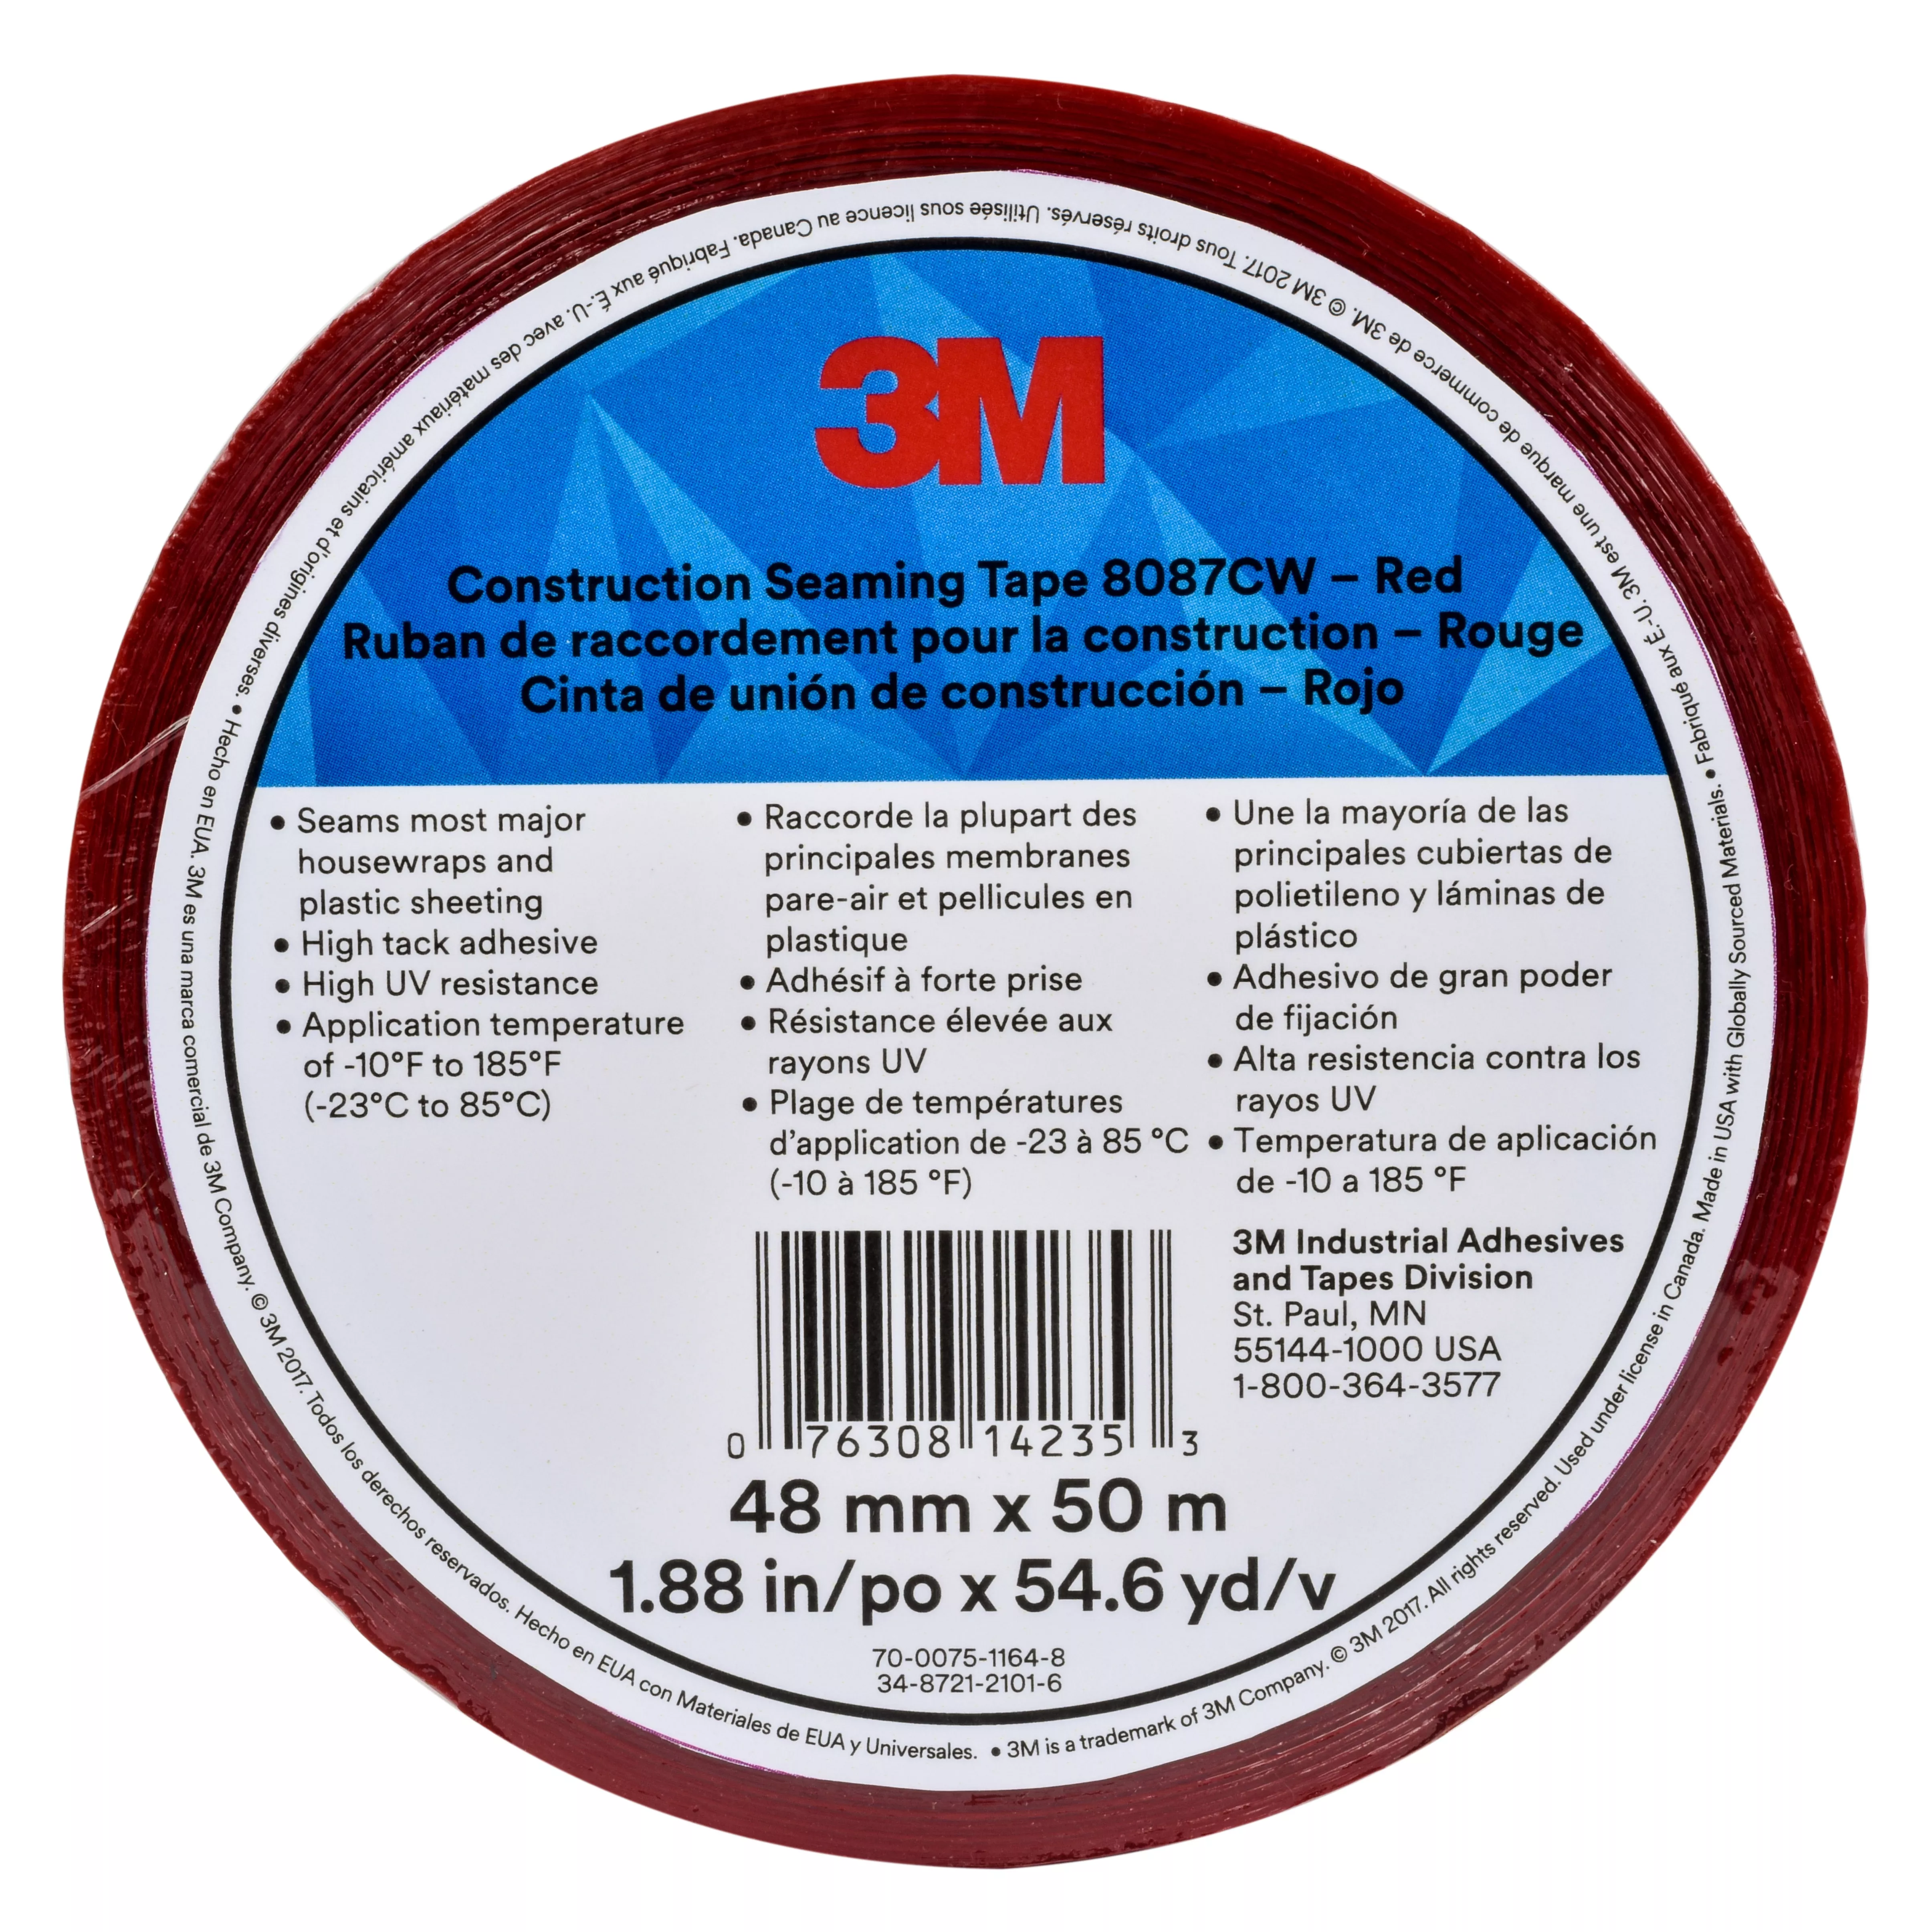 3M™ Construction Seaming Tape 8087CW, Red, 48 mm x 50 m, 24 Roll/Case